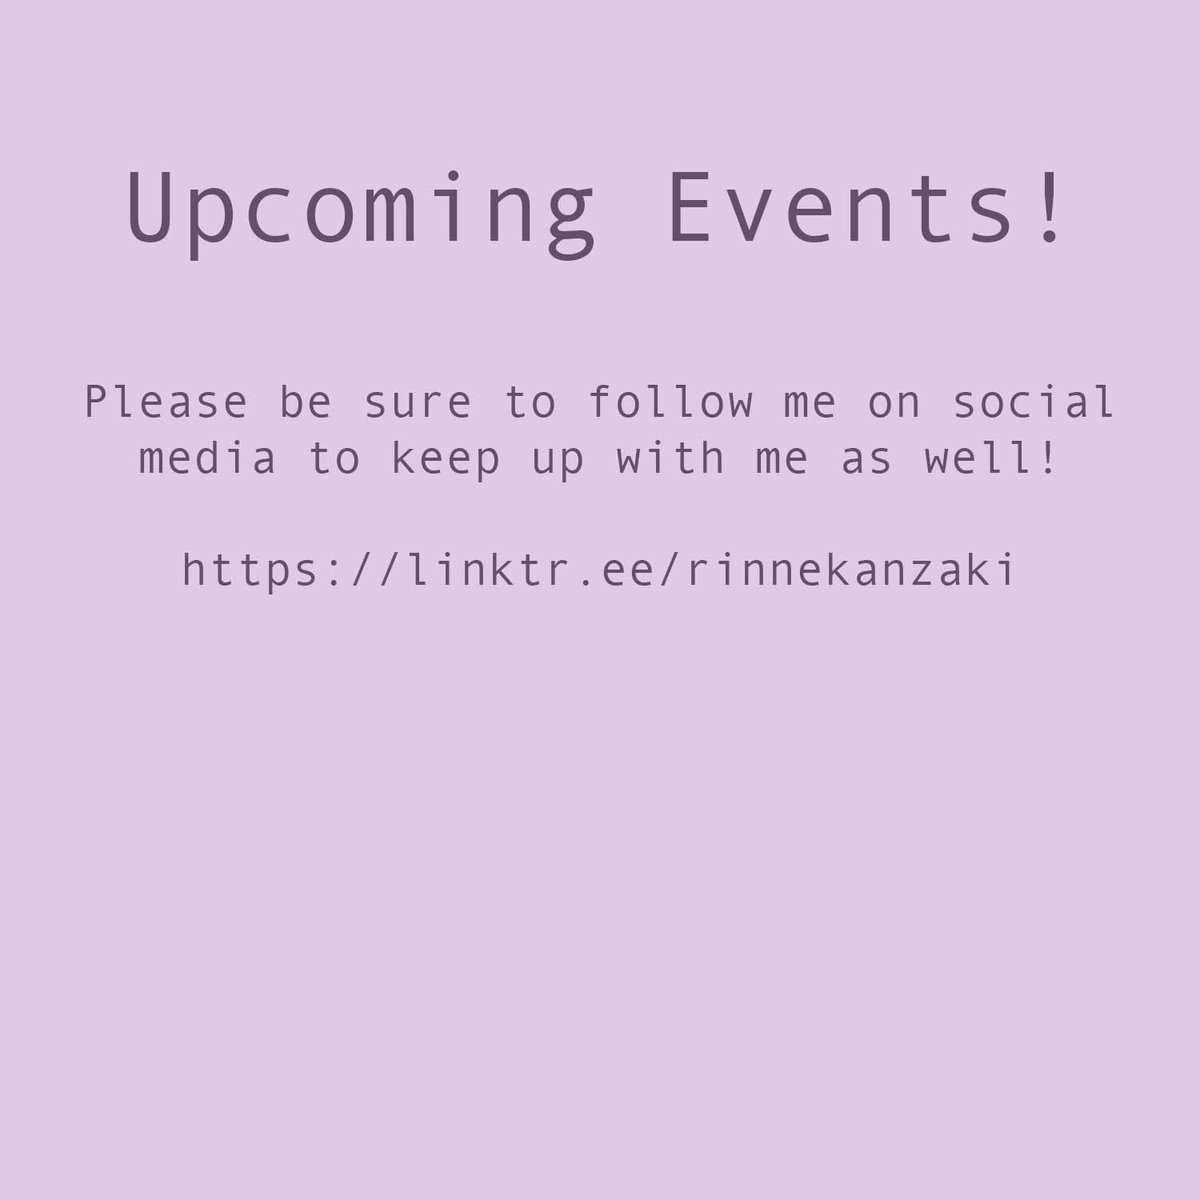 Image of Upcoming Events!